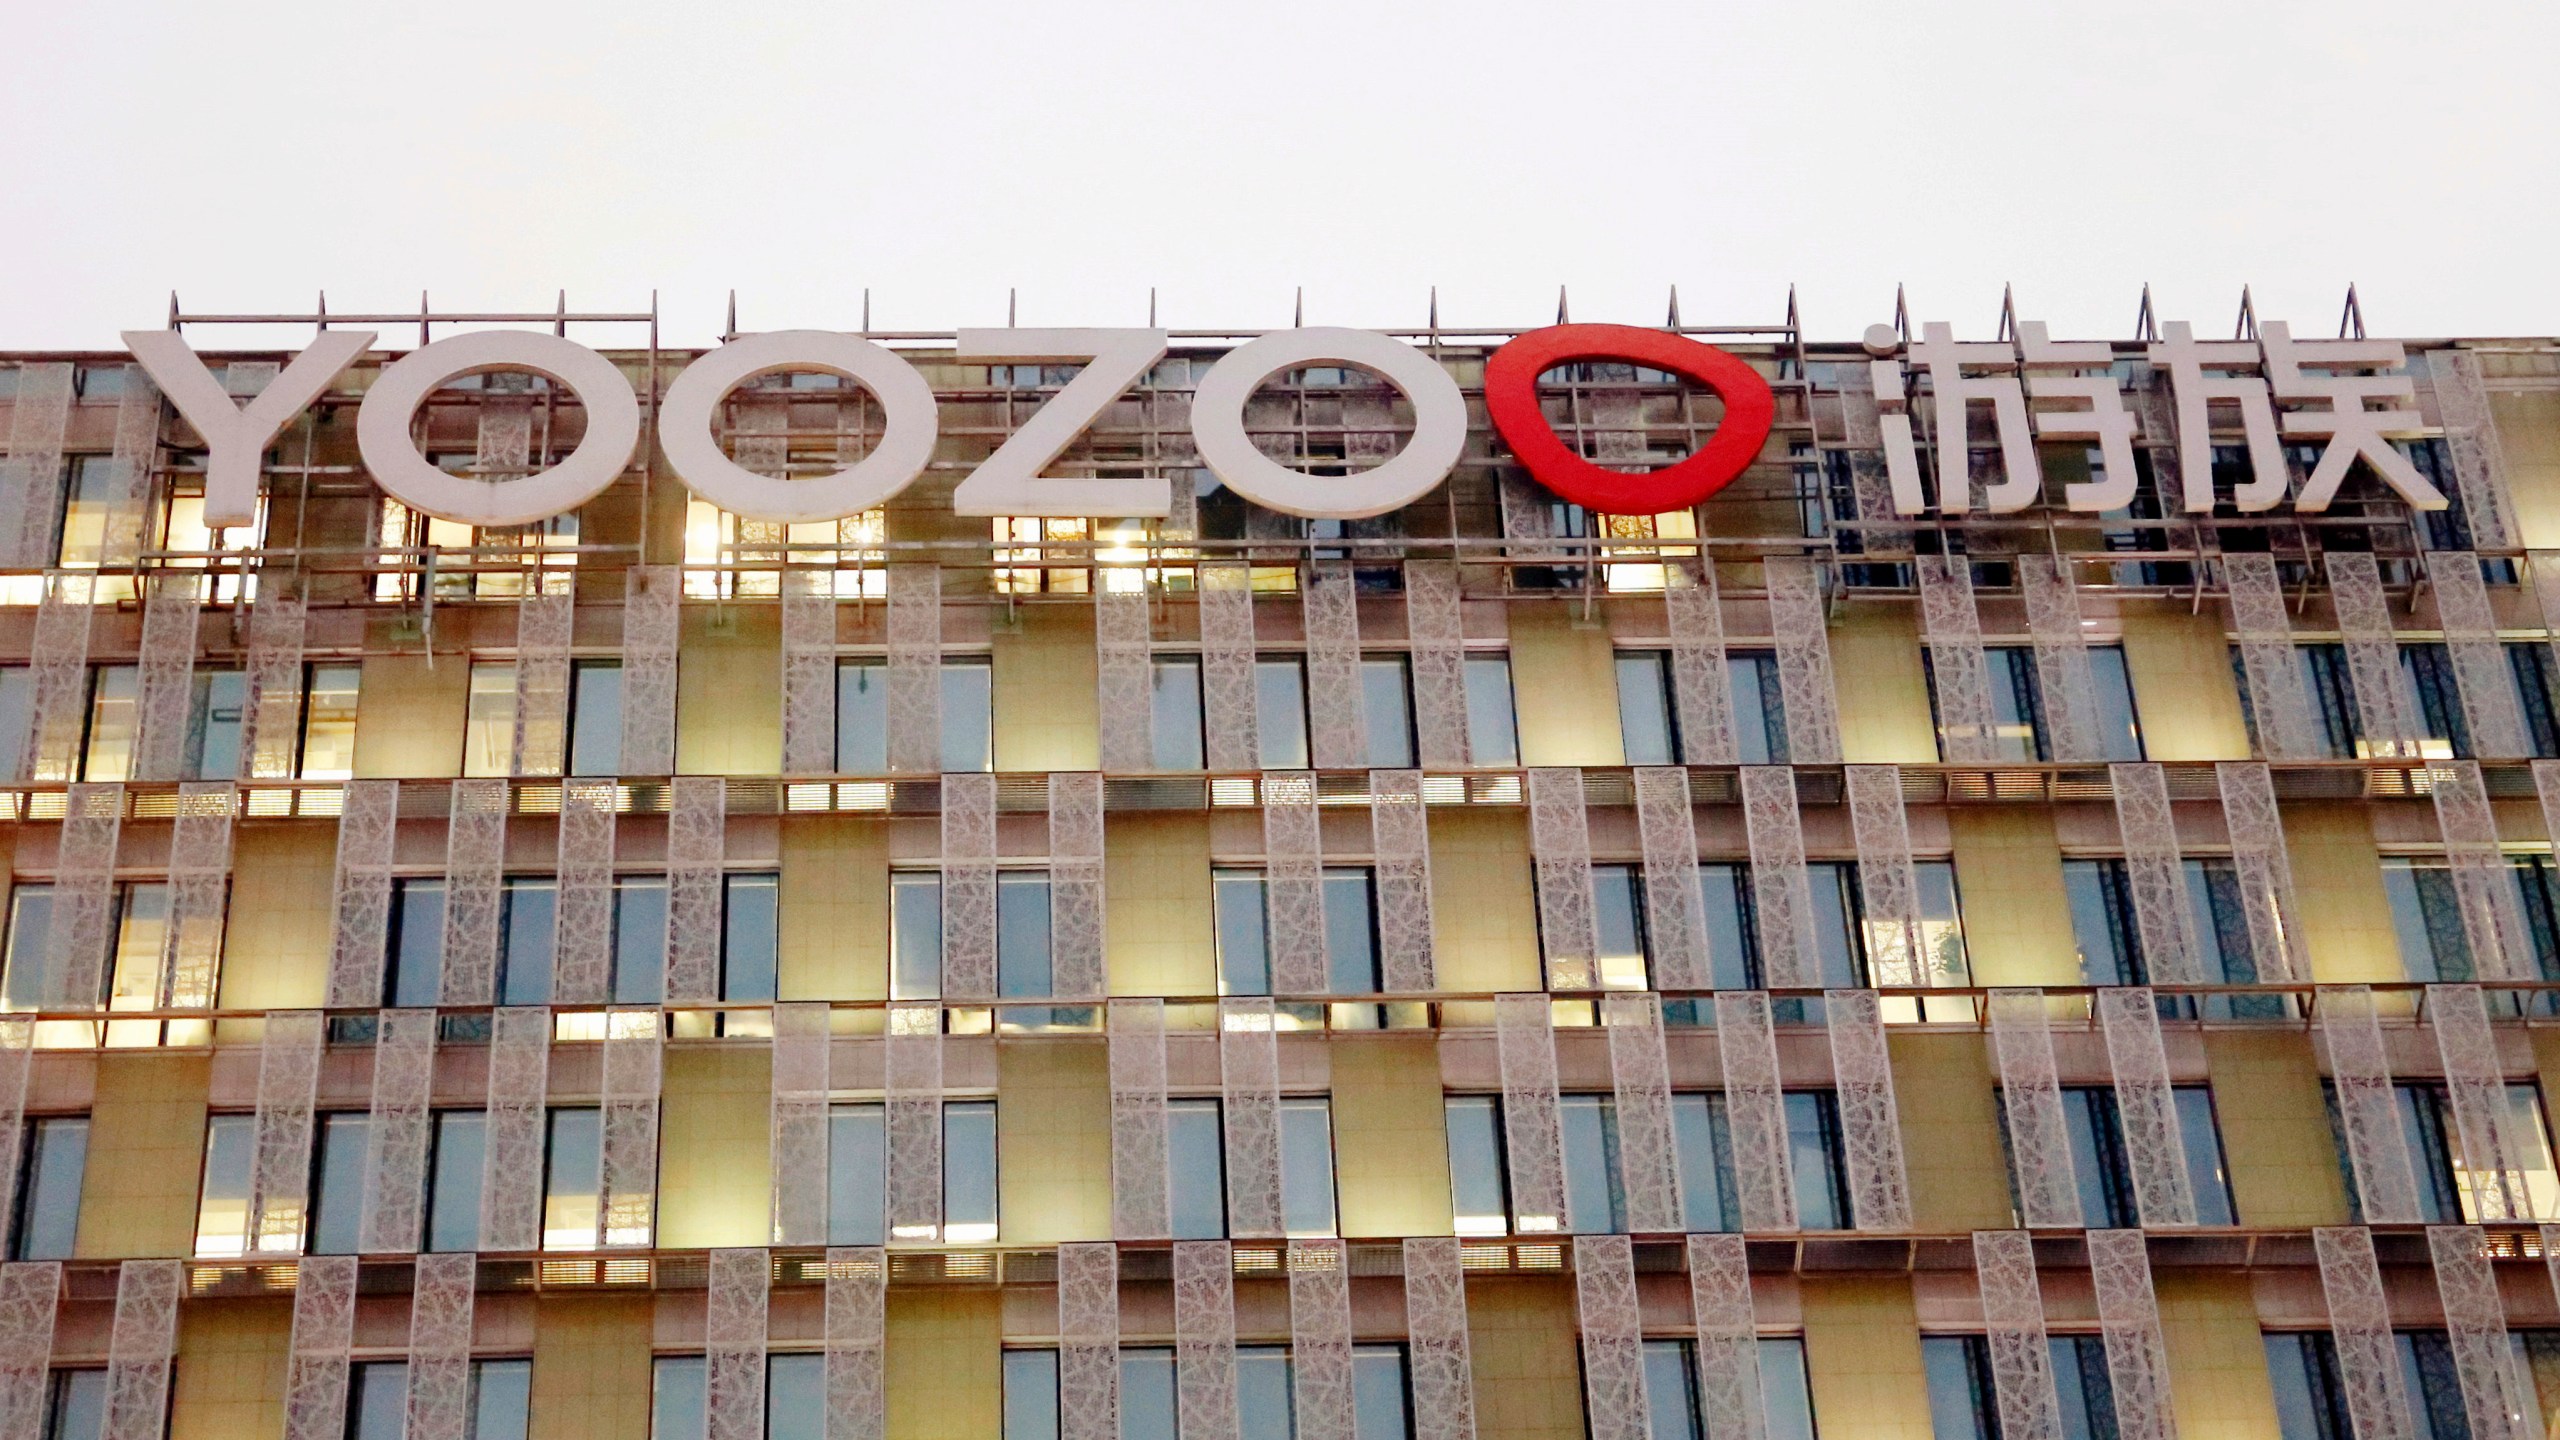 FILE - The Yoozoo logo is displayed at the Yoozoo group headquarters in Shanghai on Dec. 8, 2020. A former executive at Yoozoo Games was sentenced to death on Friday, March 22, 2024, in the 2020 poisoning of the founder of the high-profile Chinese gaming company, which has links to Game of Thrones and the new Netflix series, “The Three-Body Problem.”(Chinatopix via AP, File)